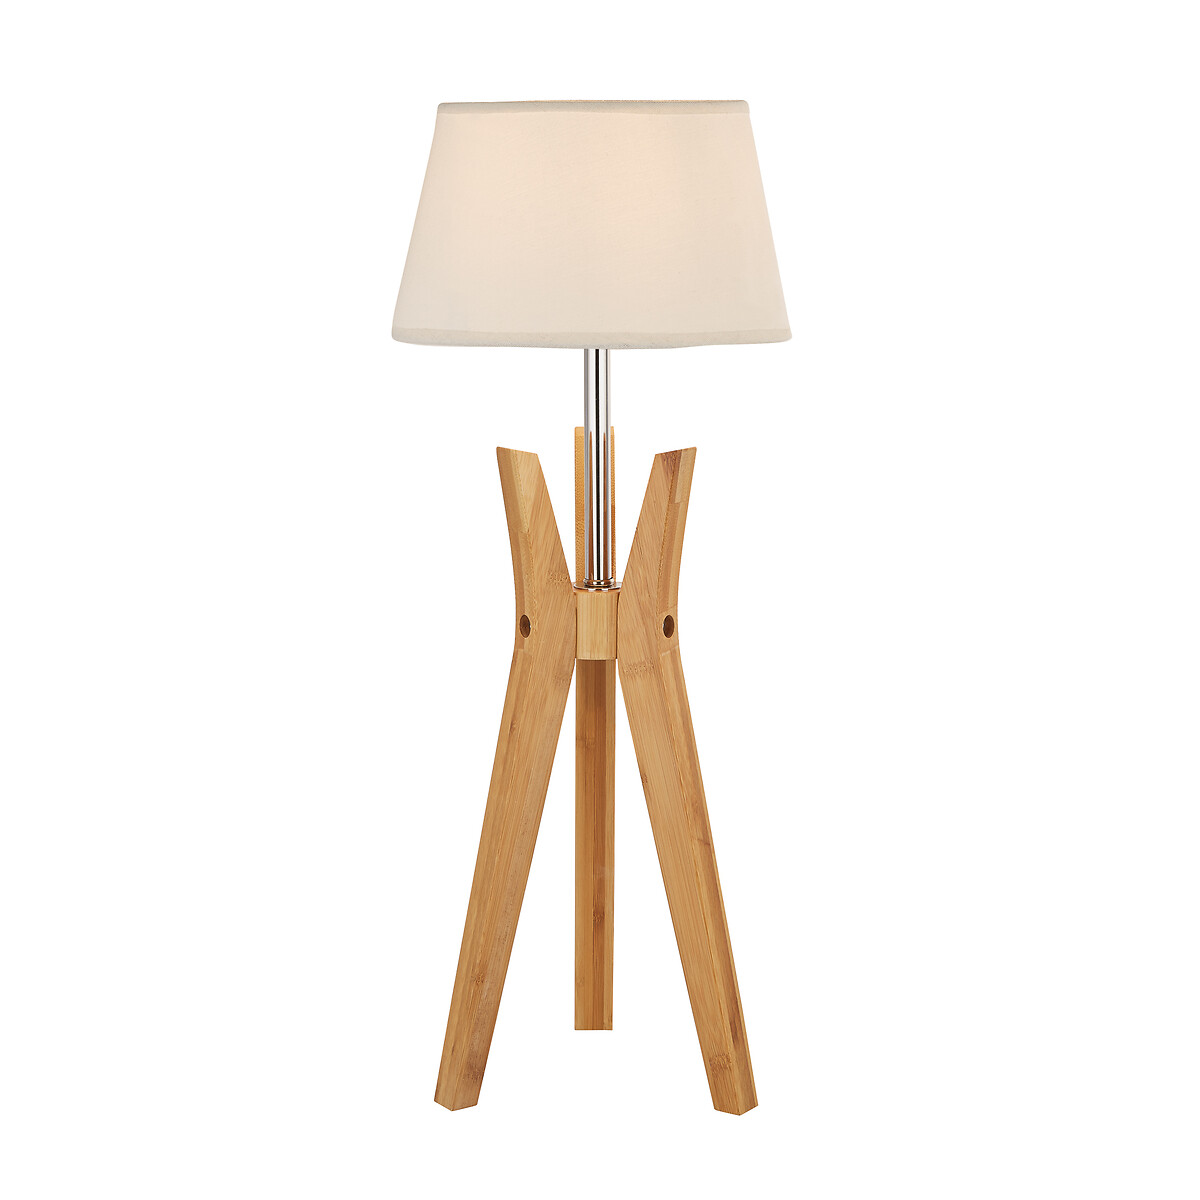 Tapered Natural Wood Tripod Table Lamp, White And Natural Wood Table Lamps